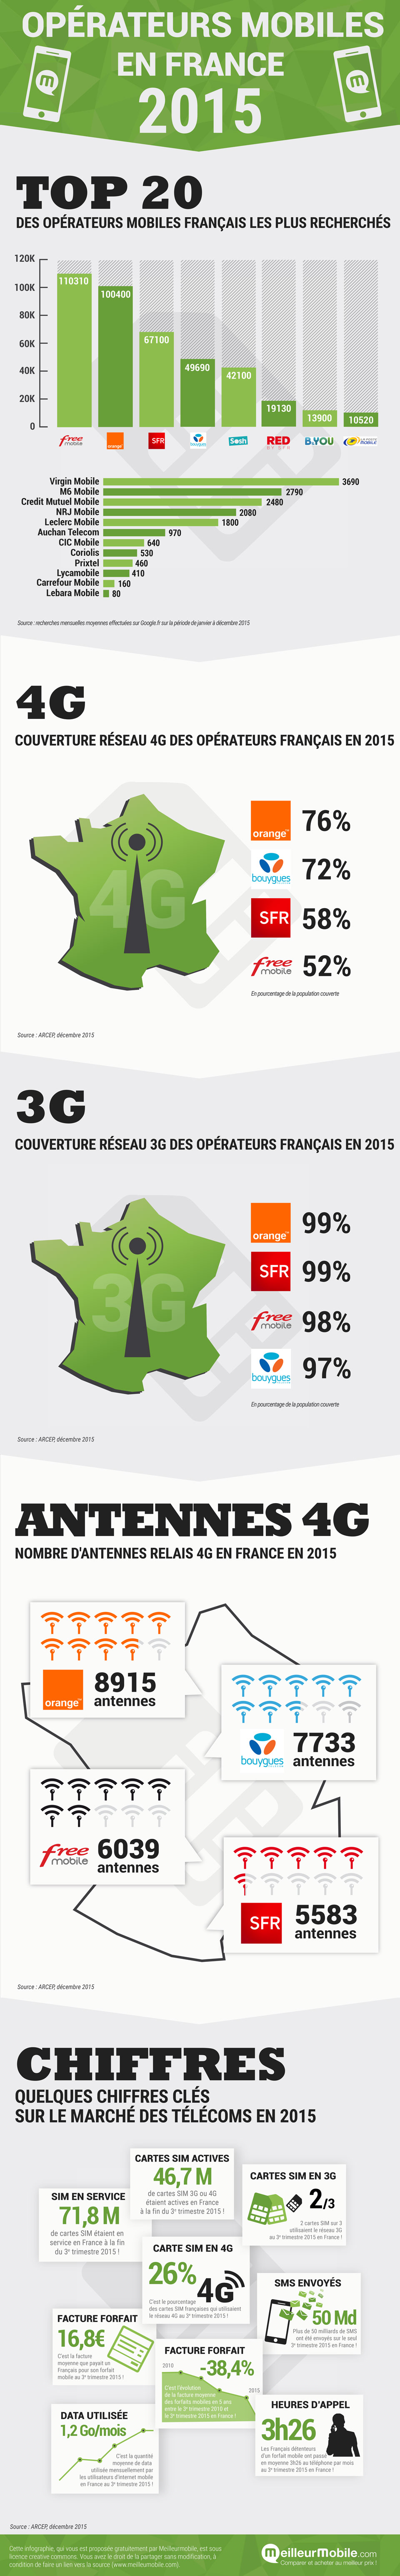 21 infographie-operateurs-mobiles-france-2015